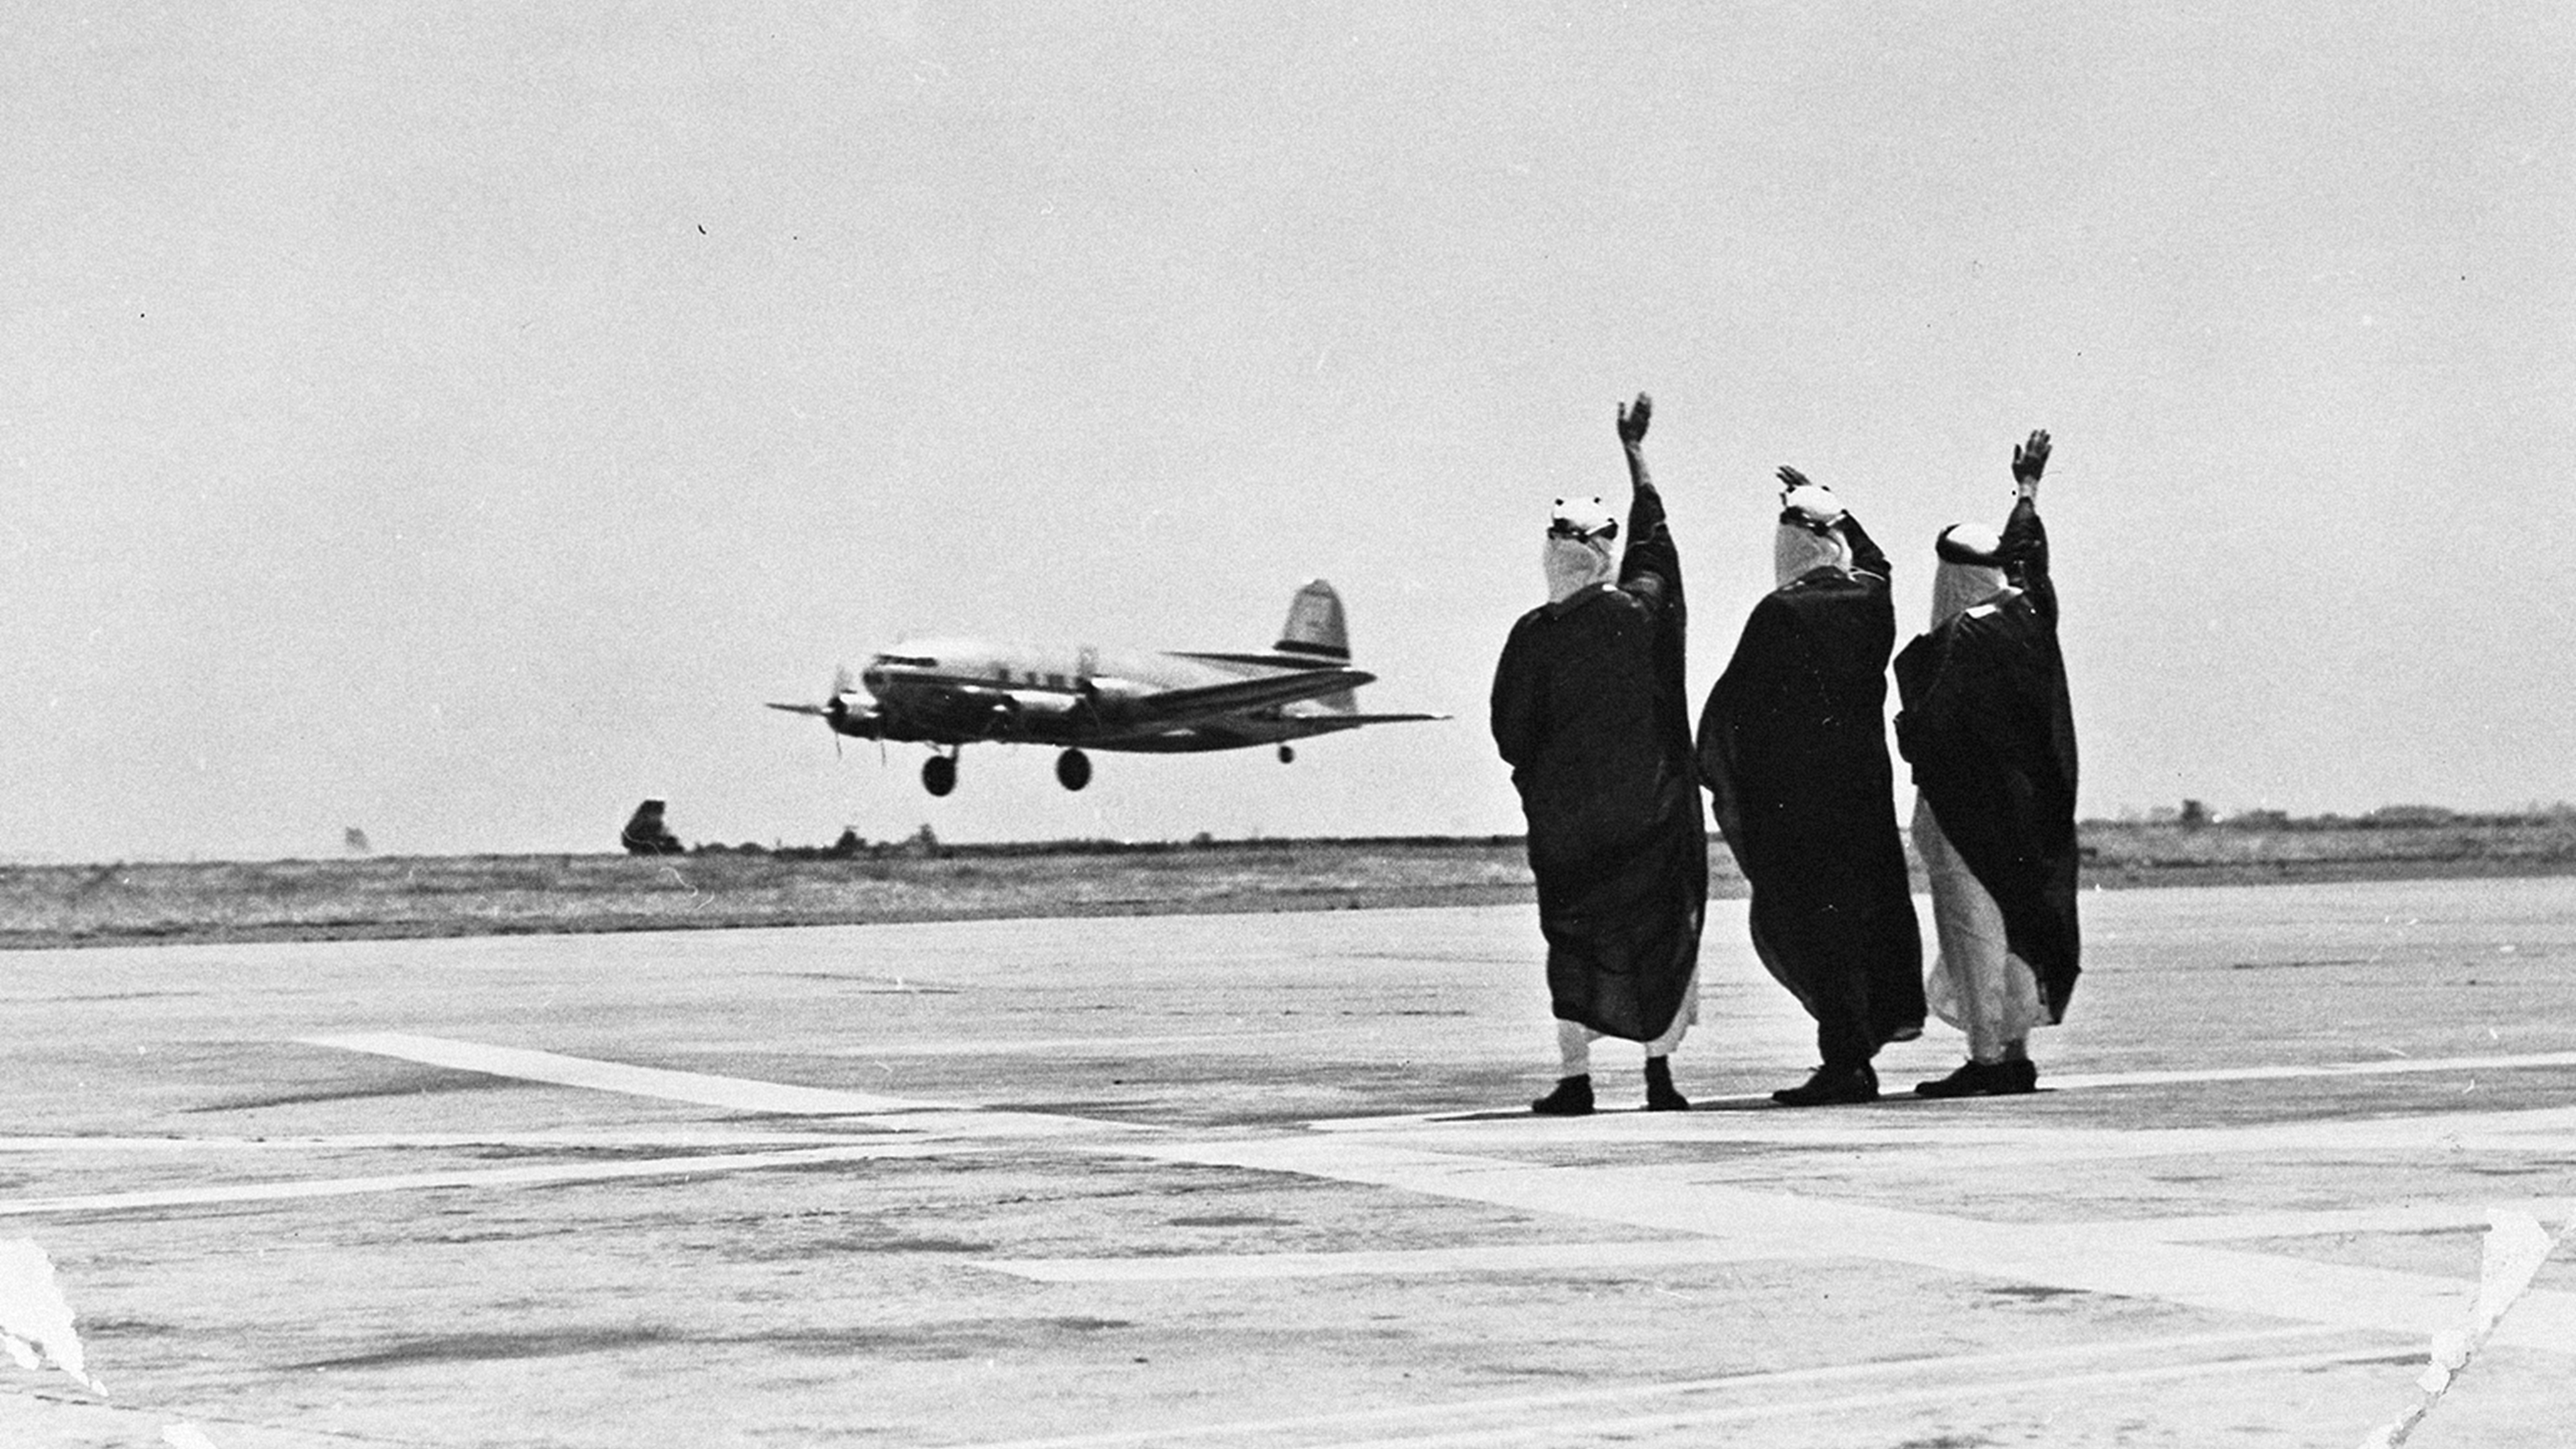 Three people waving at an airplane flying by at a landing strip